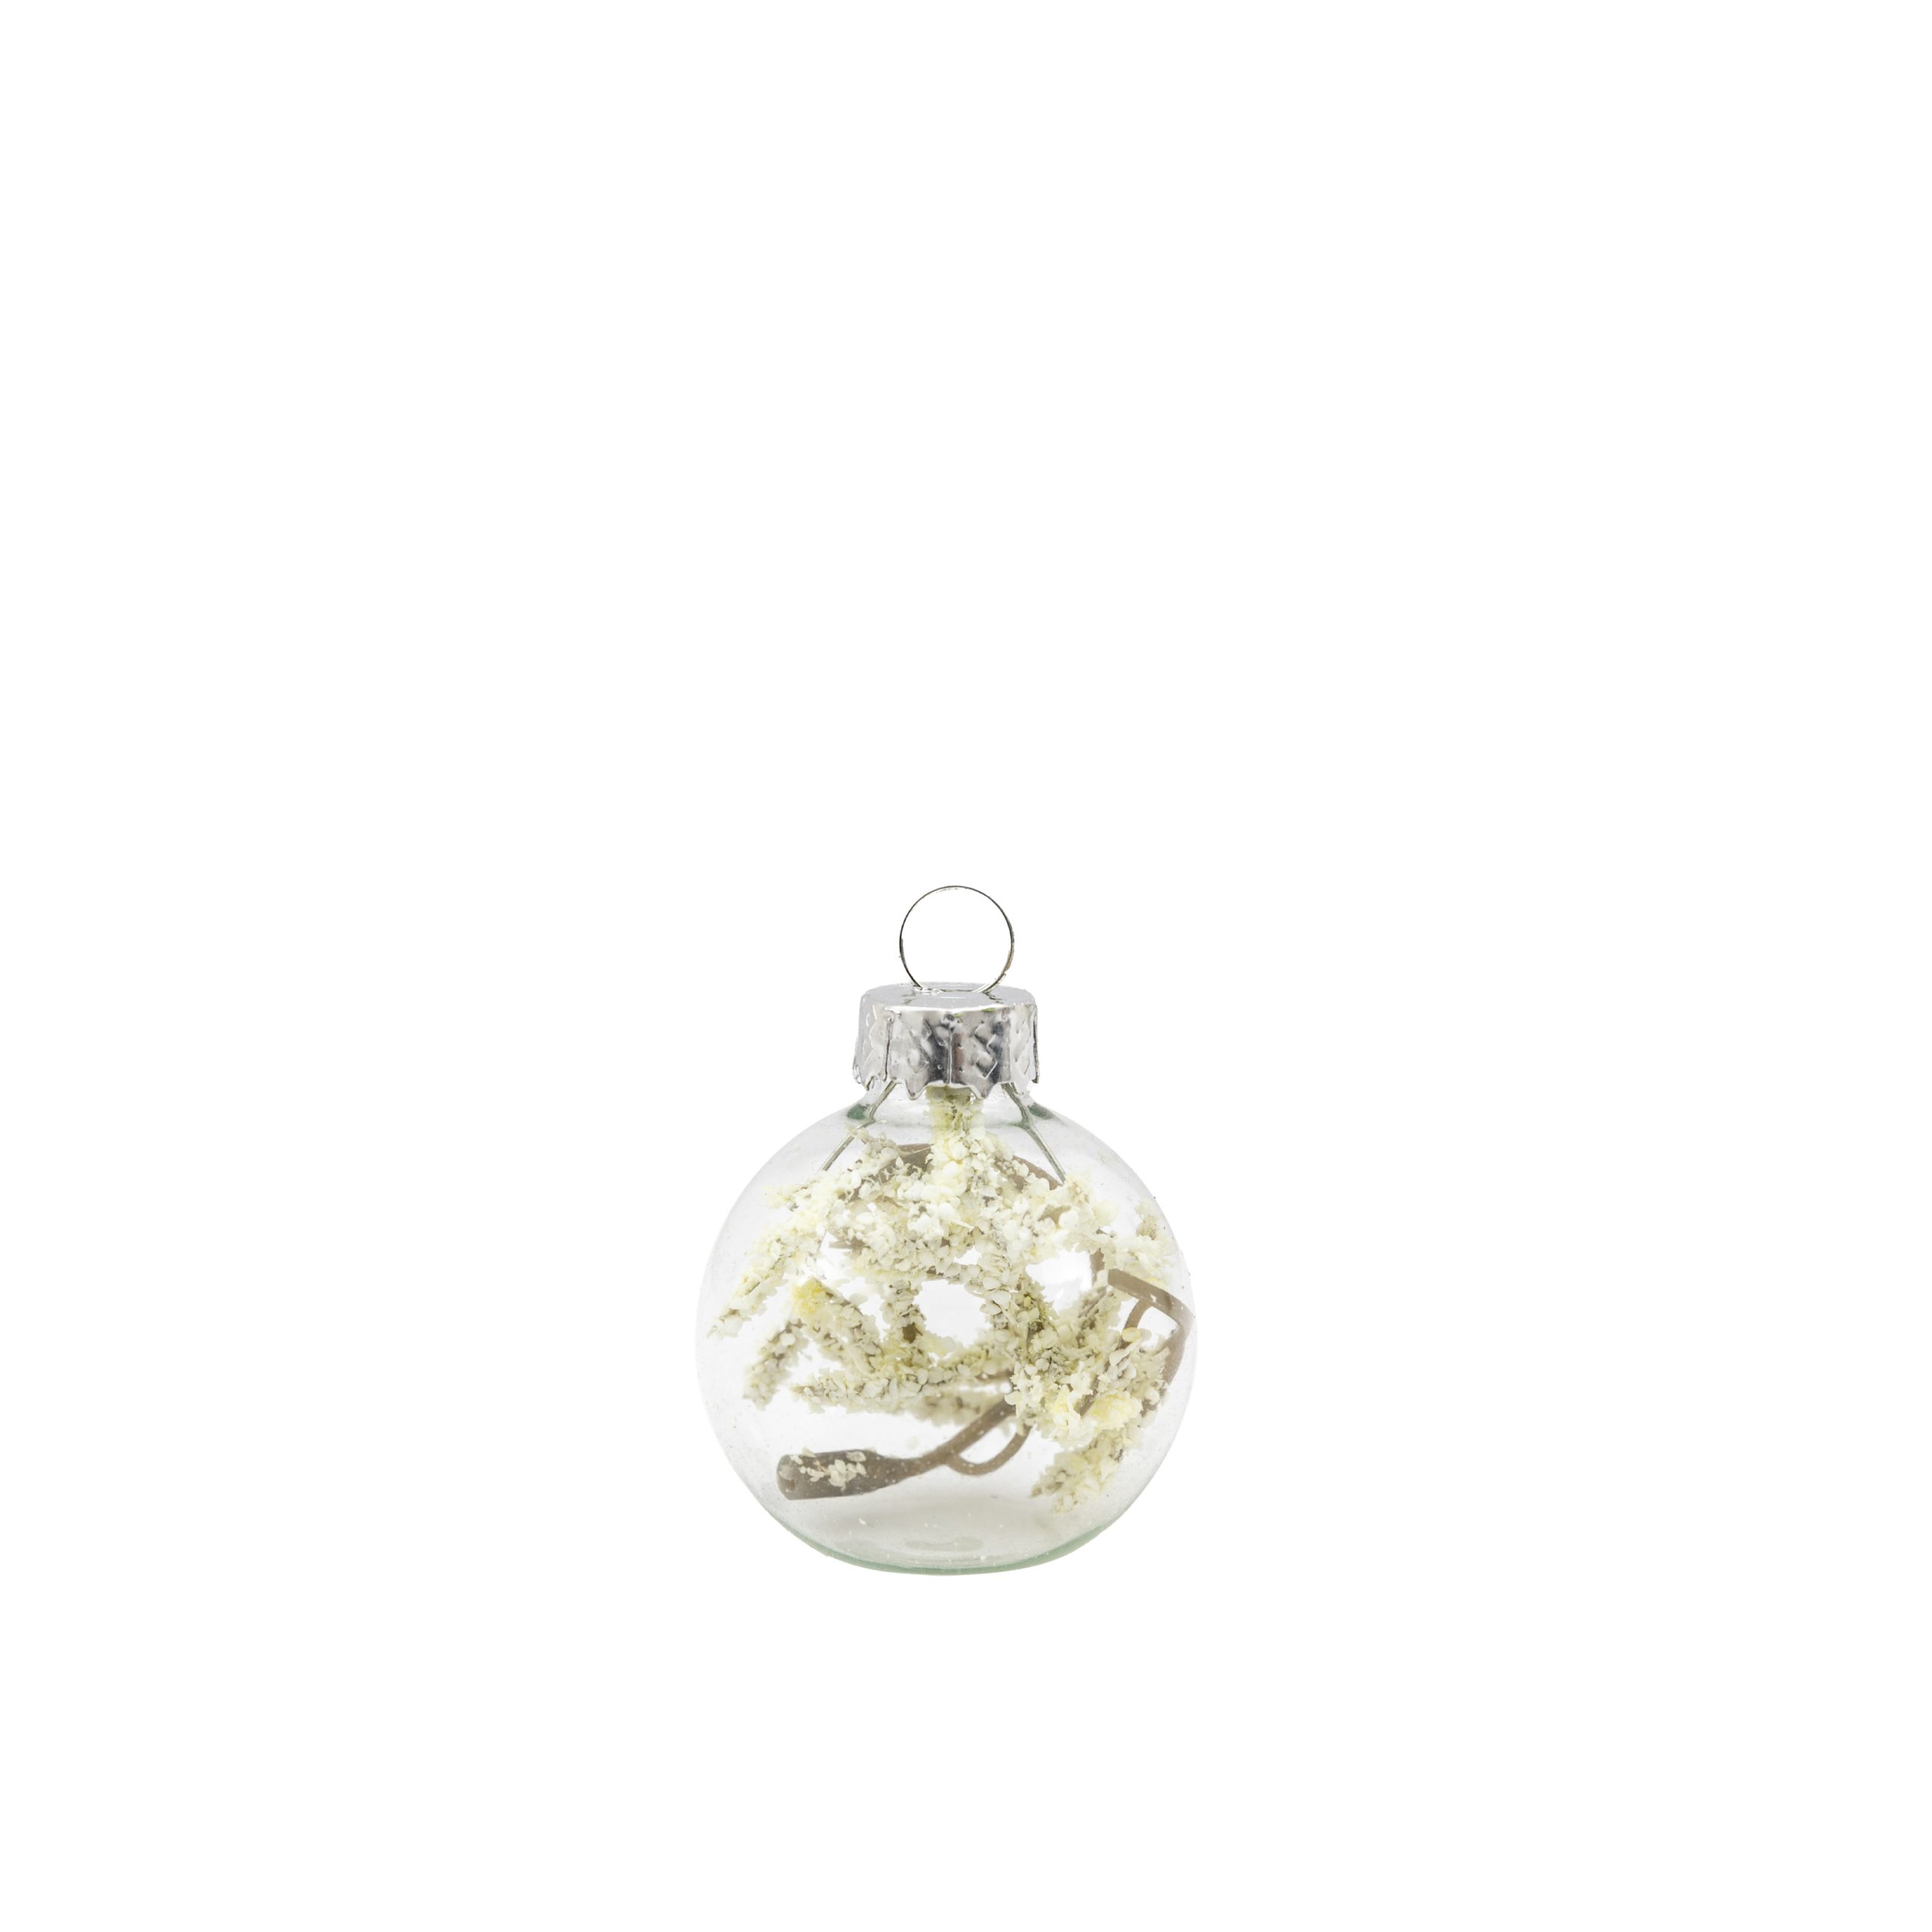 Gallery Direct Dry Flora Bauble Name Card Holder (Set of 6)